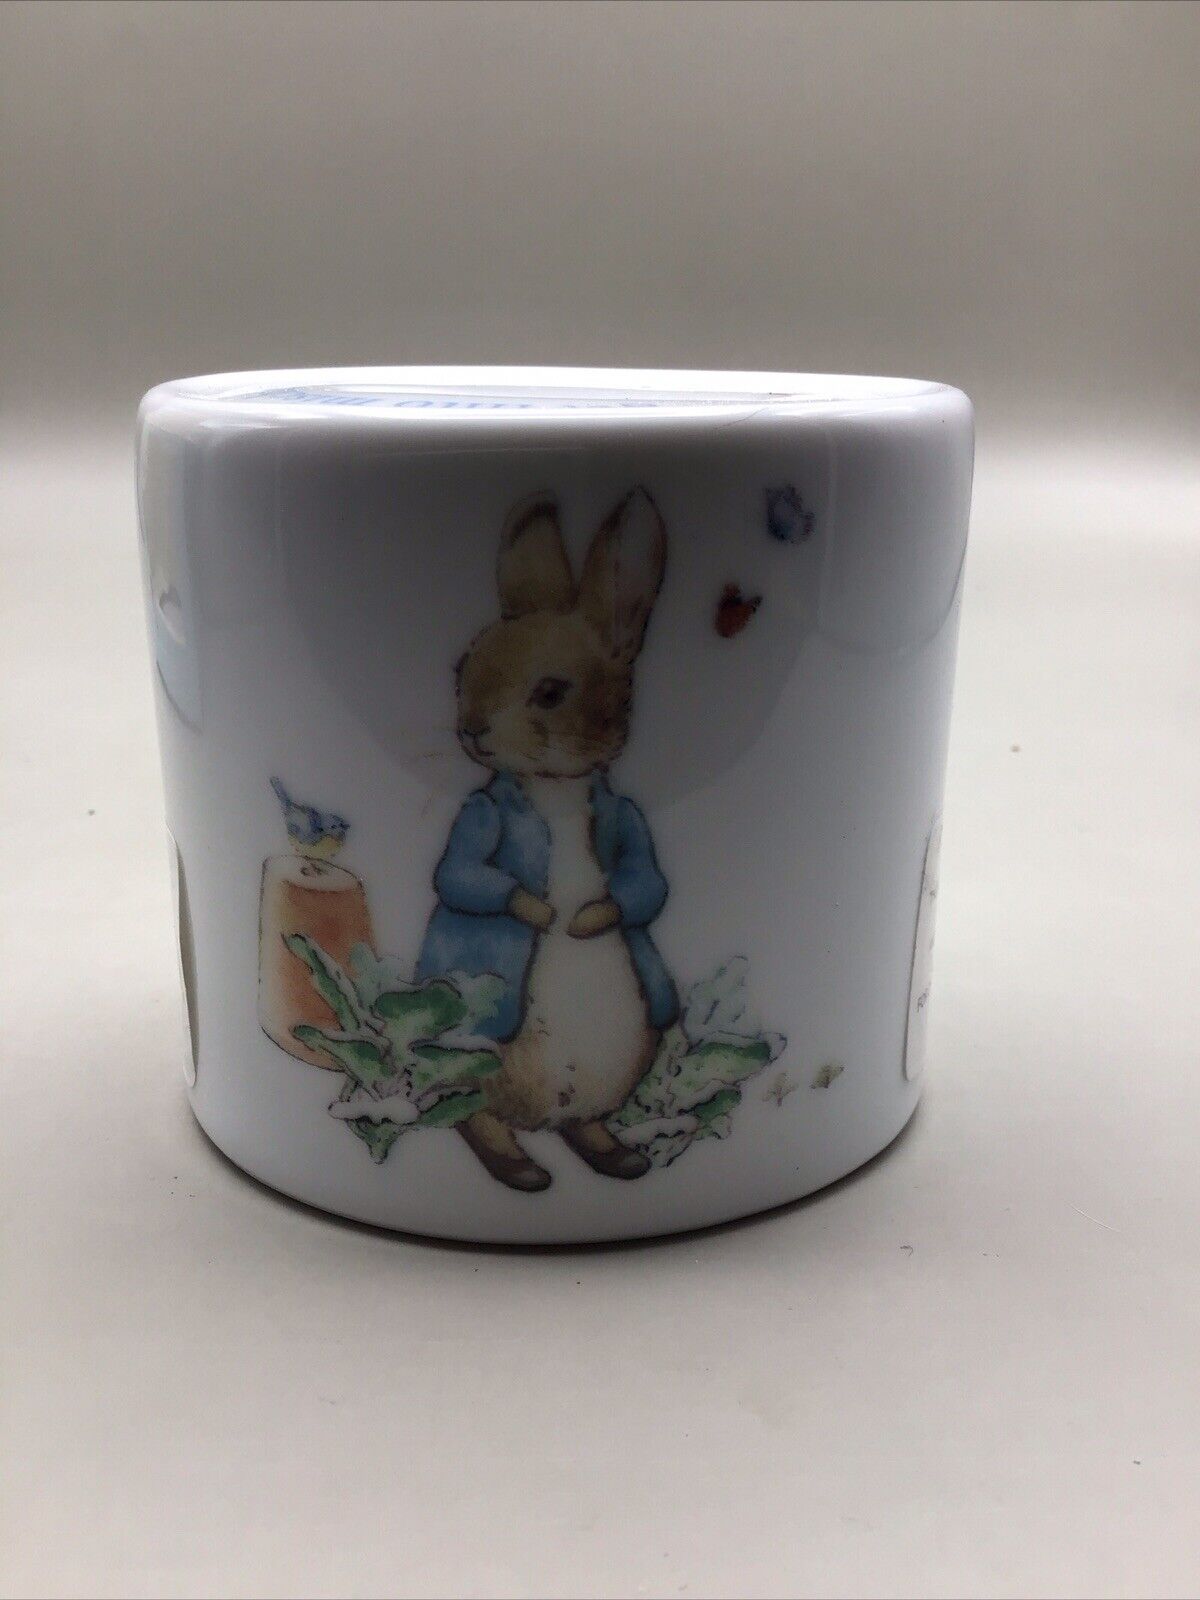 Wedgwood Beatrix Potter  Peter Rabbit Oval Bank-made in England Boy baby decor.